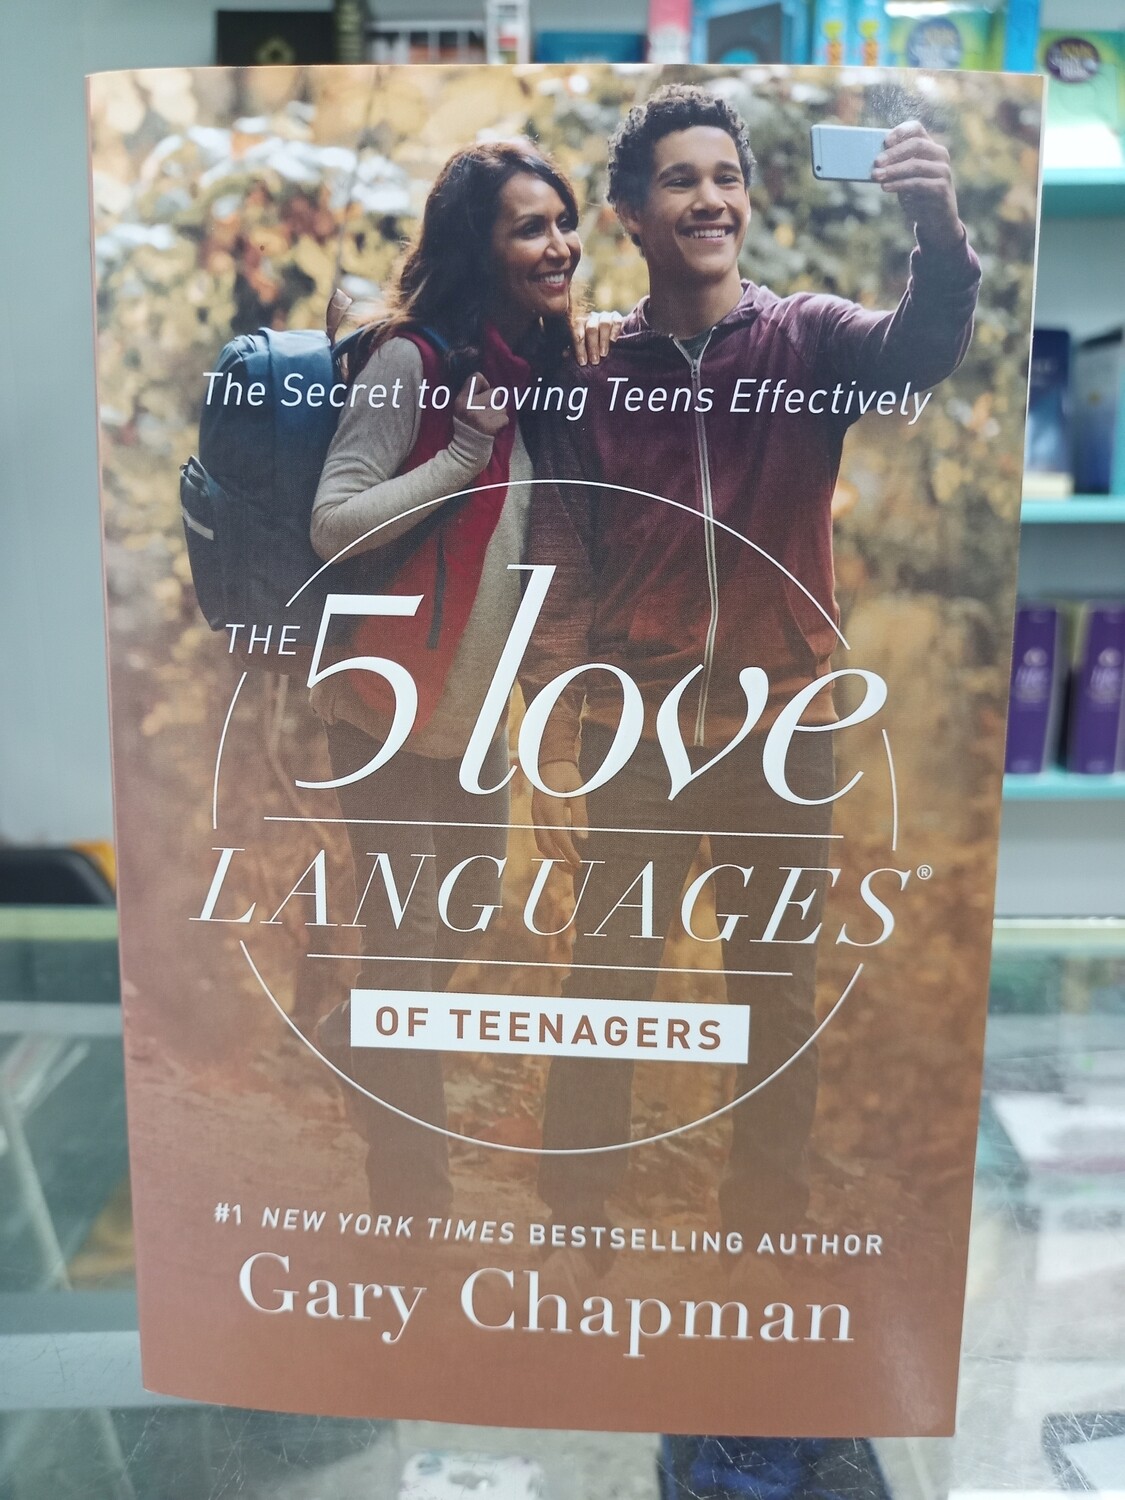 The 5 love languages of teenagers by Gary Chapman